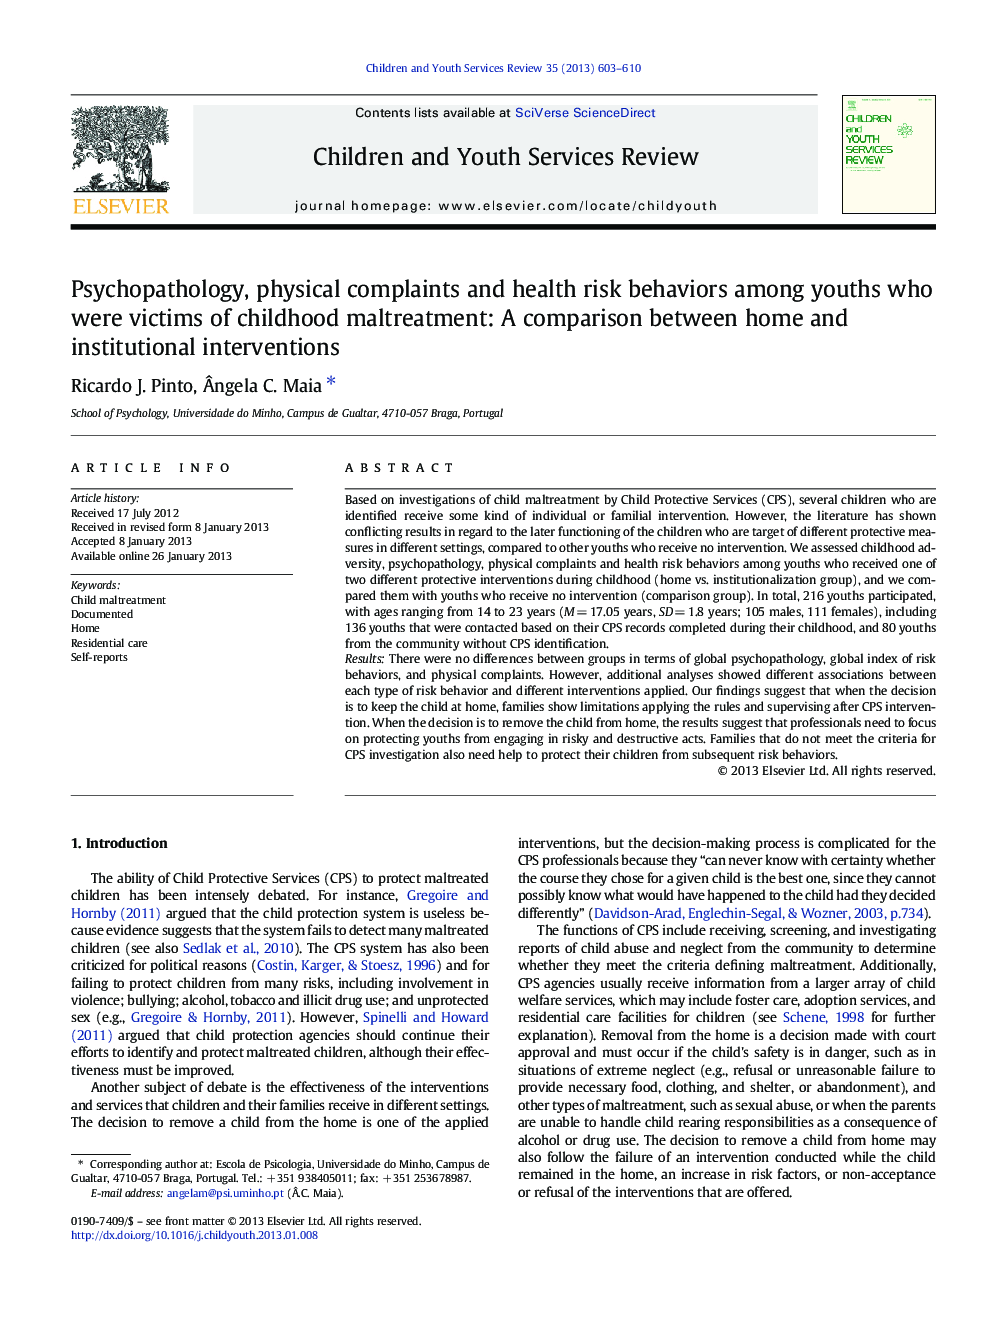 Psychopathology, physical complaints and health risk behaviors among youths who were victims of childhood maltreatment: A comparison between home and institutional interventions